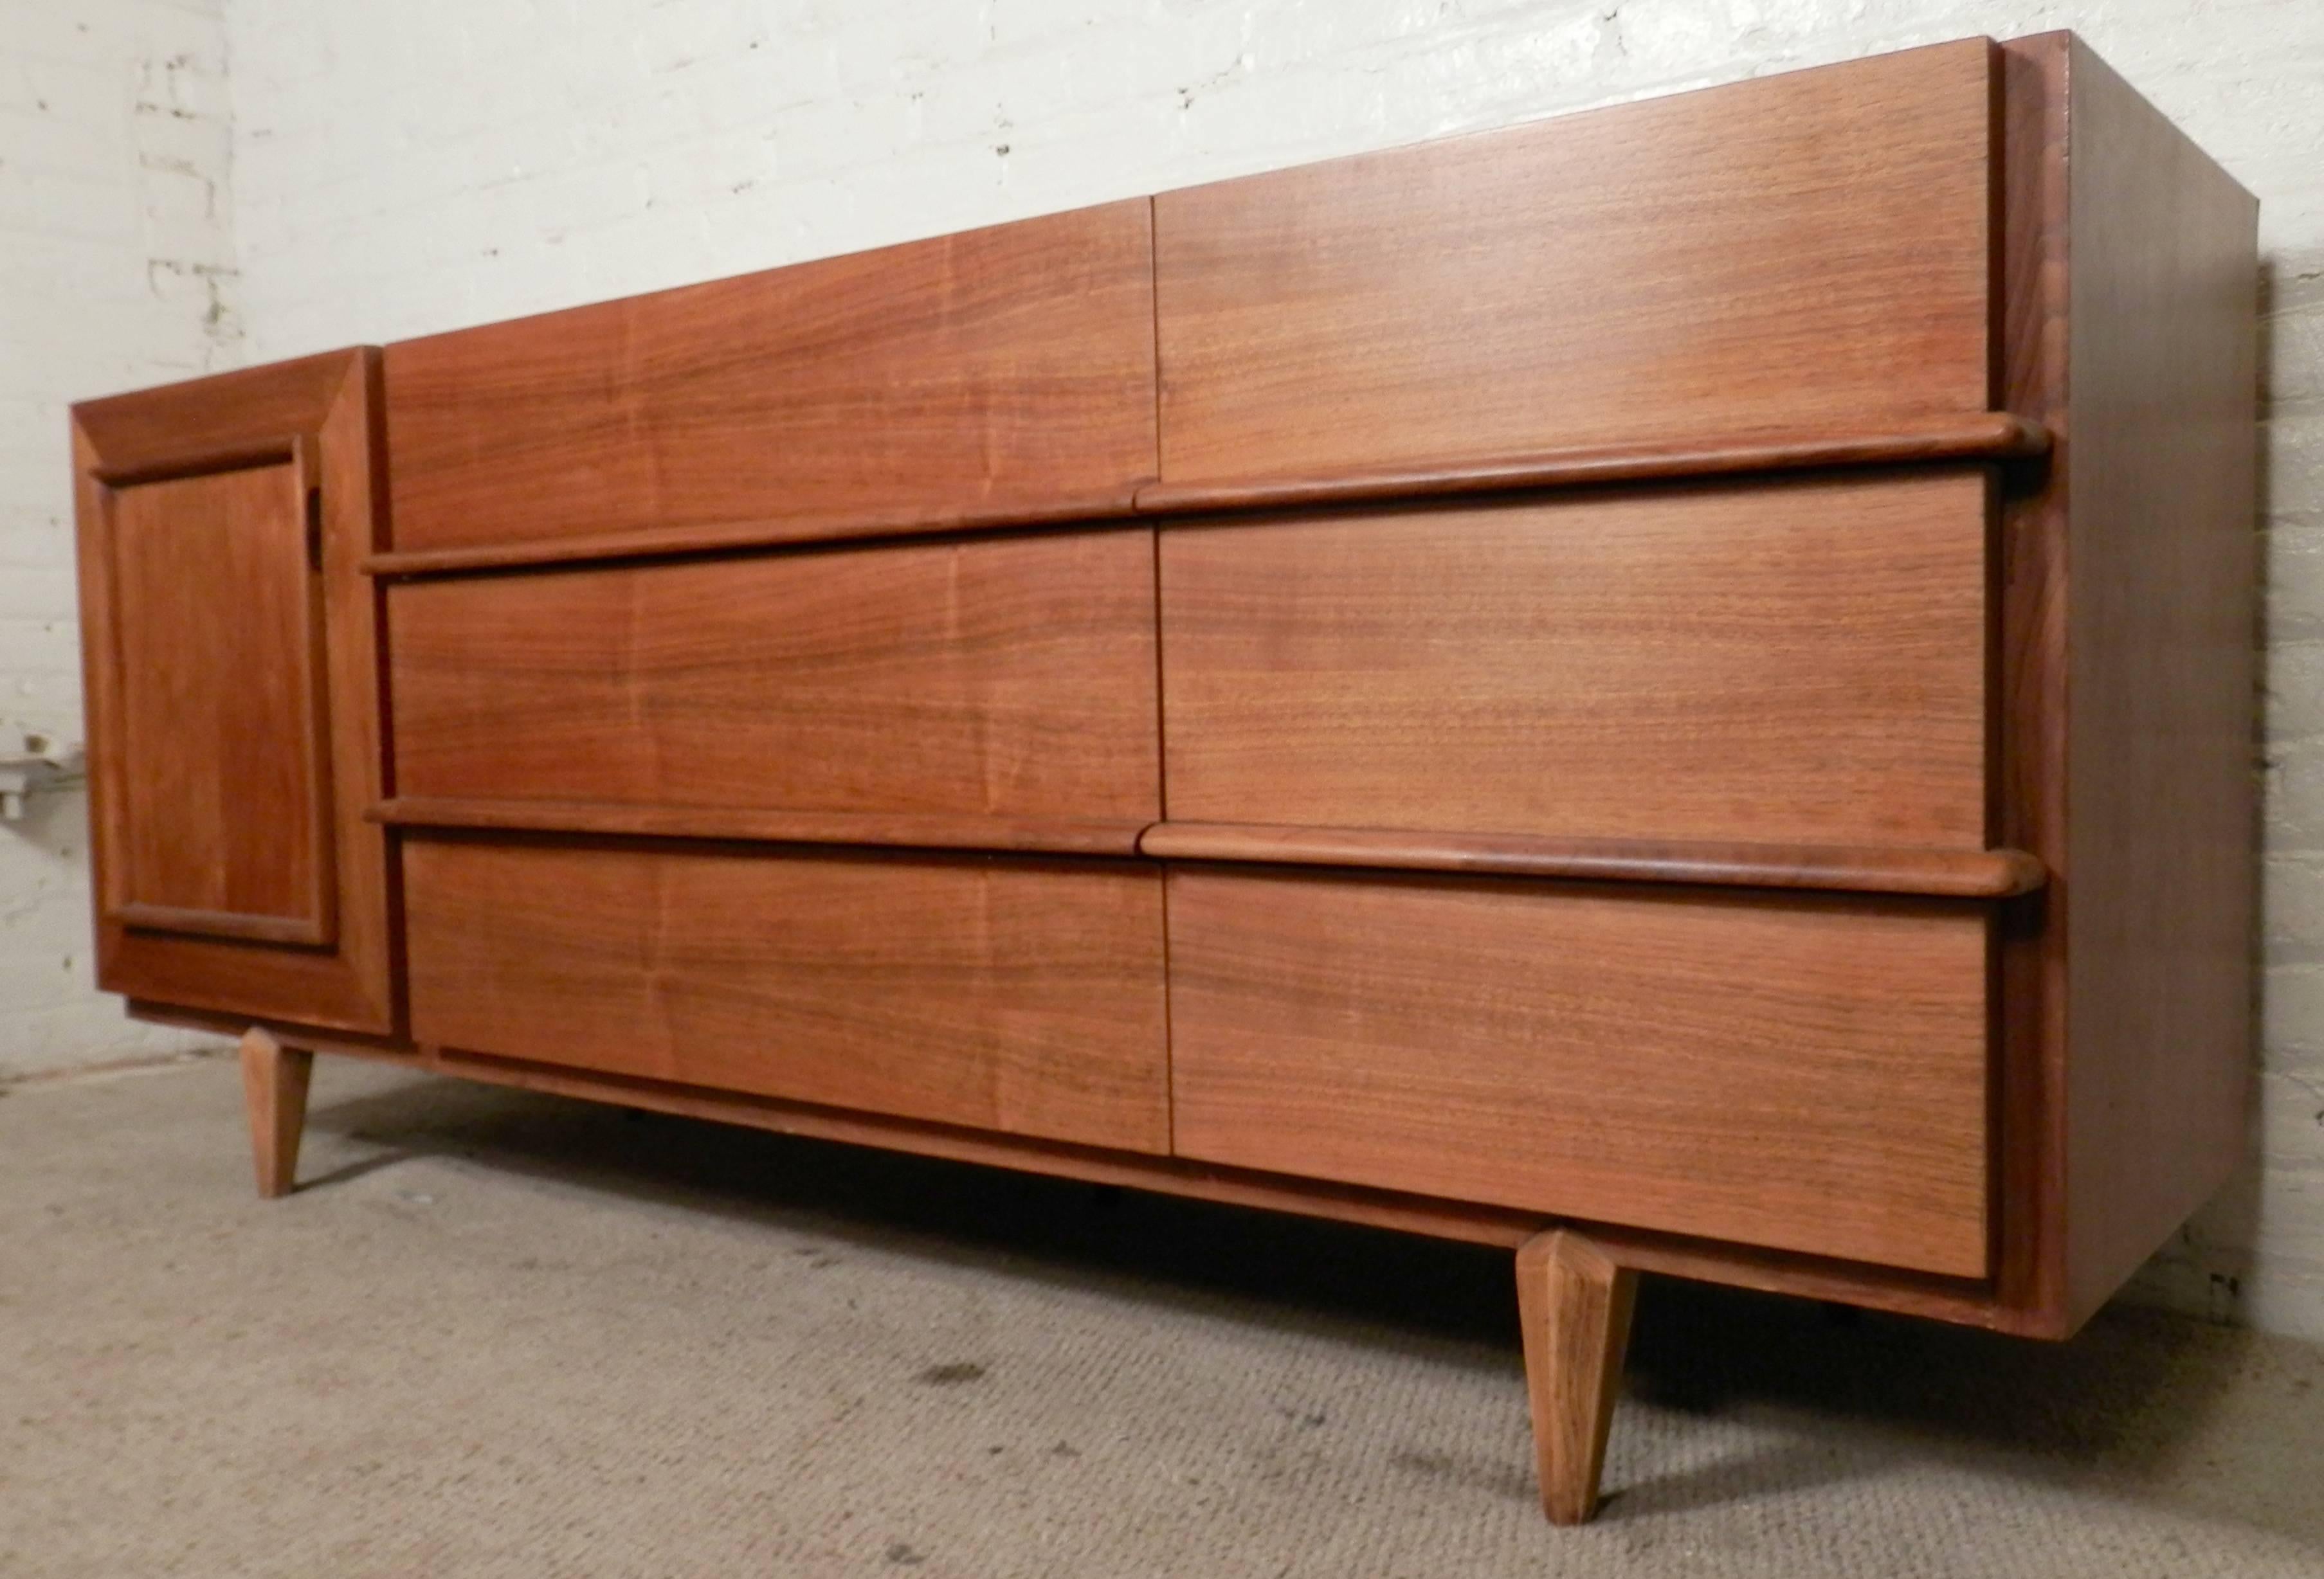 Long nine-drawer dresser in walnut grain with concealing door. Nice sculpted trim and legs.

(Please confirm item location - NY or NJ - with dealer).
 